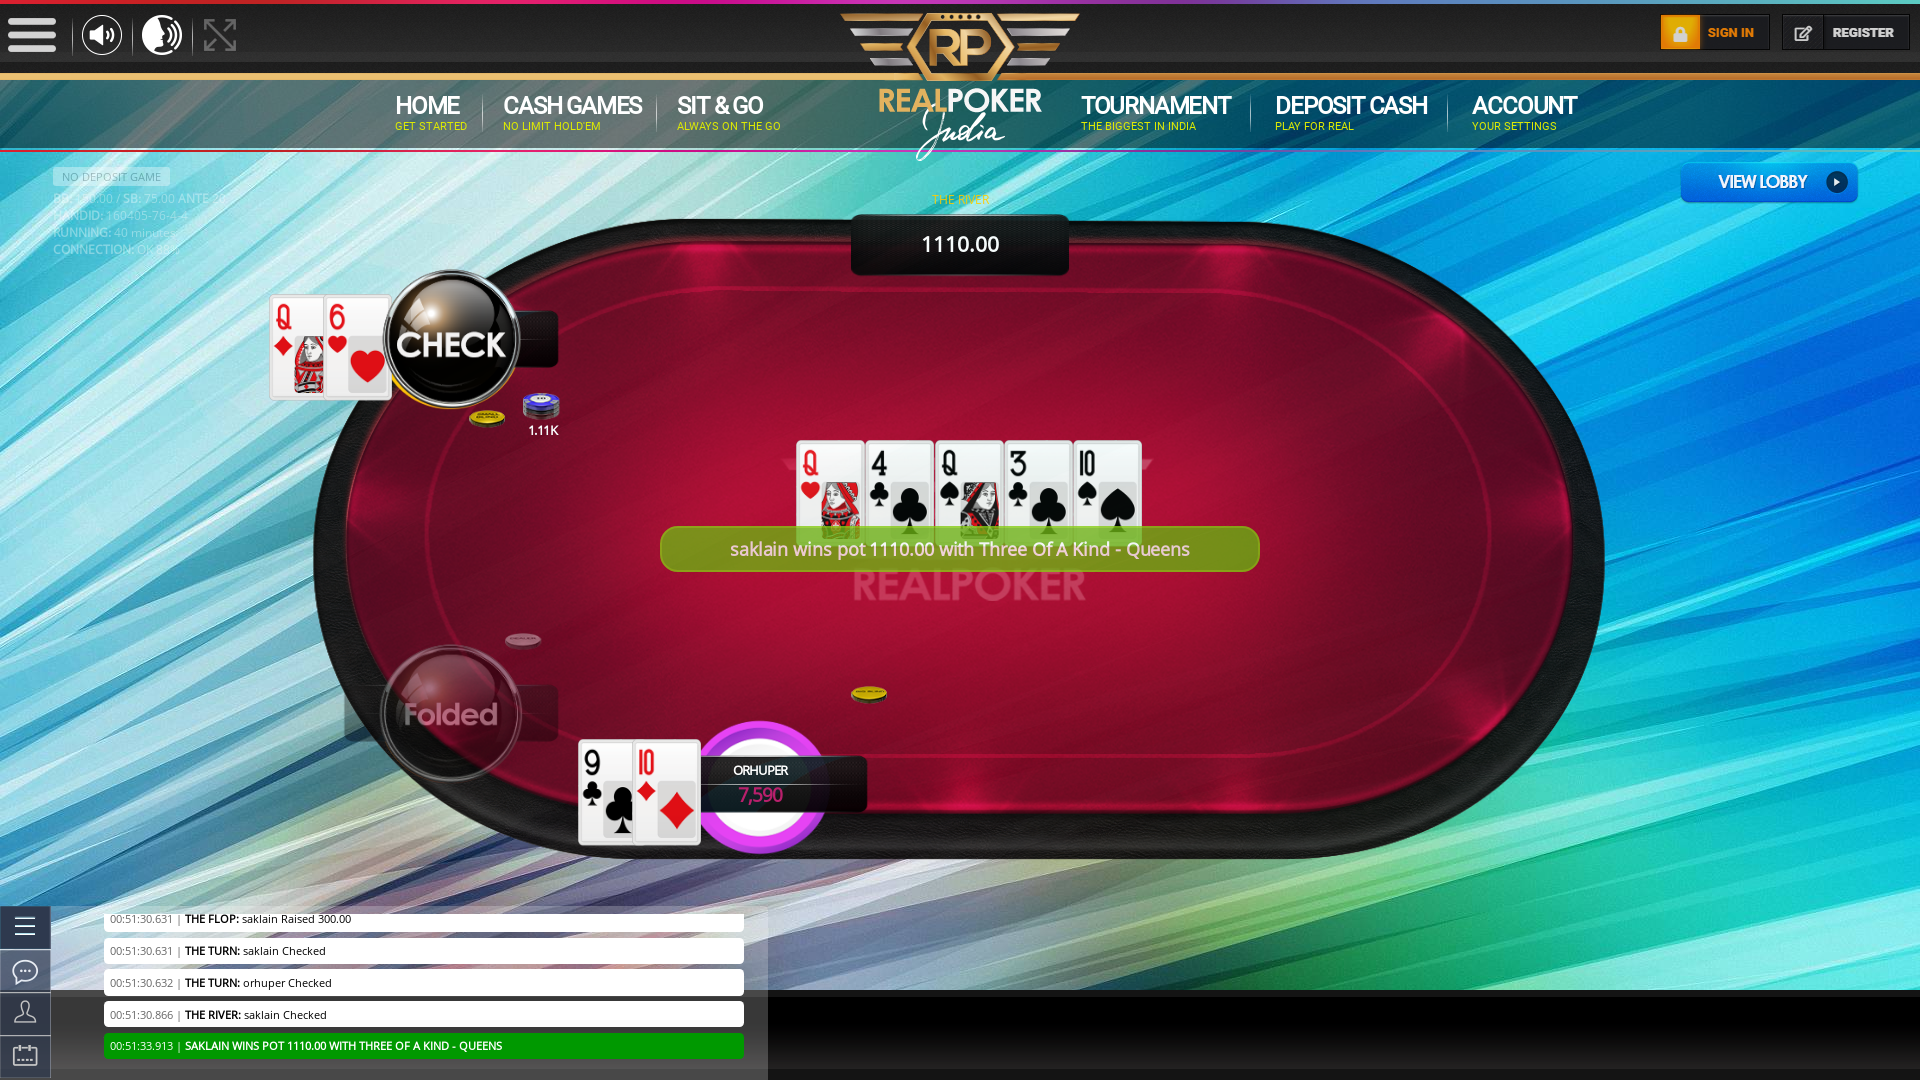 Real Indian poker on a 10 player table in the 40th minute of the game